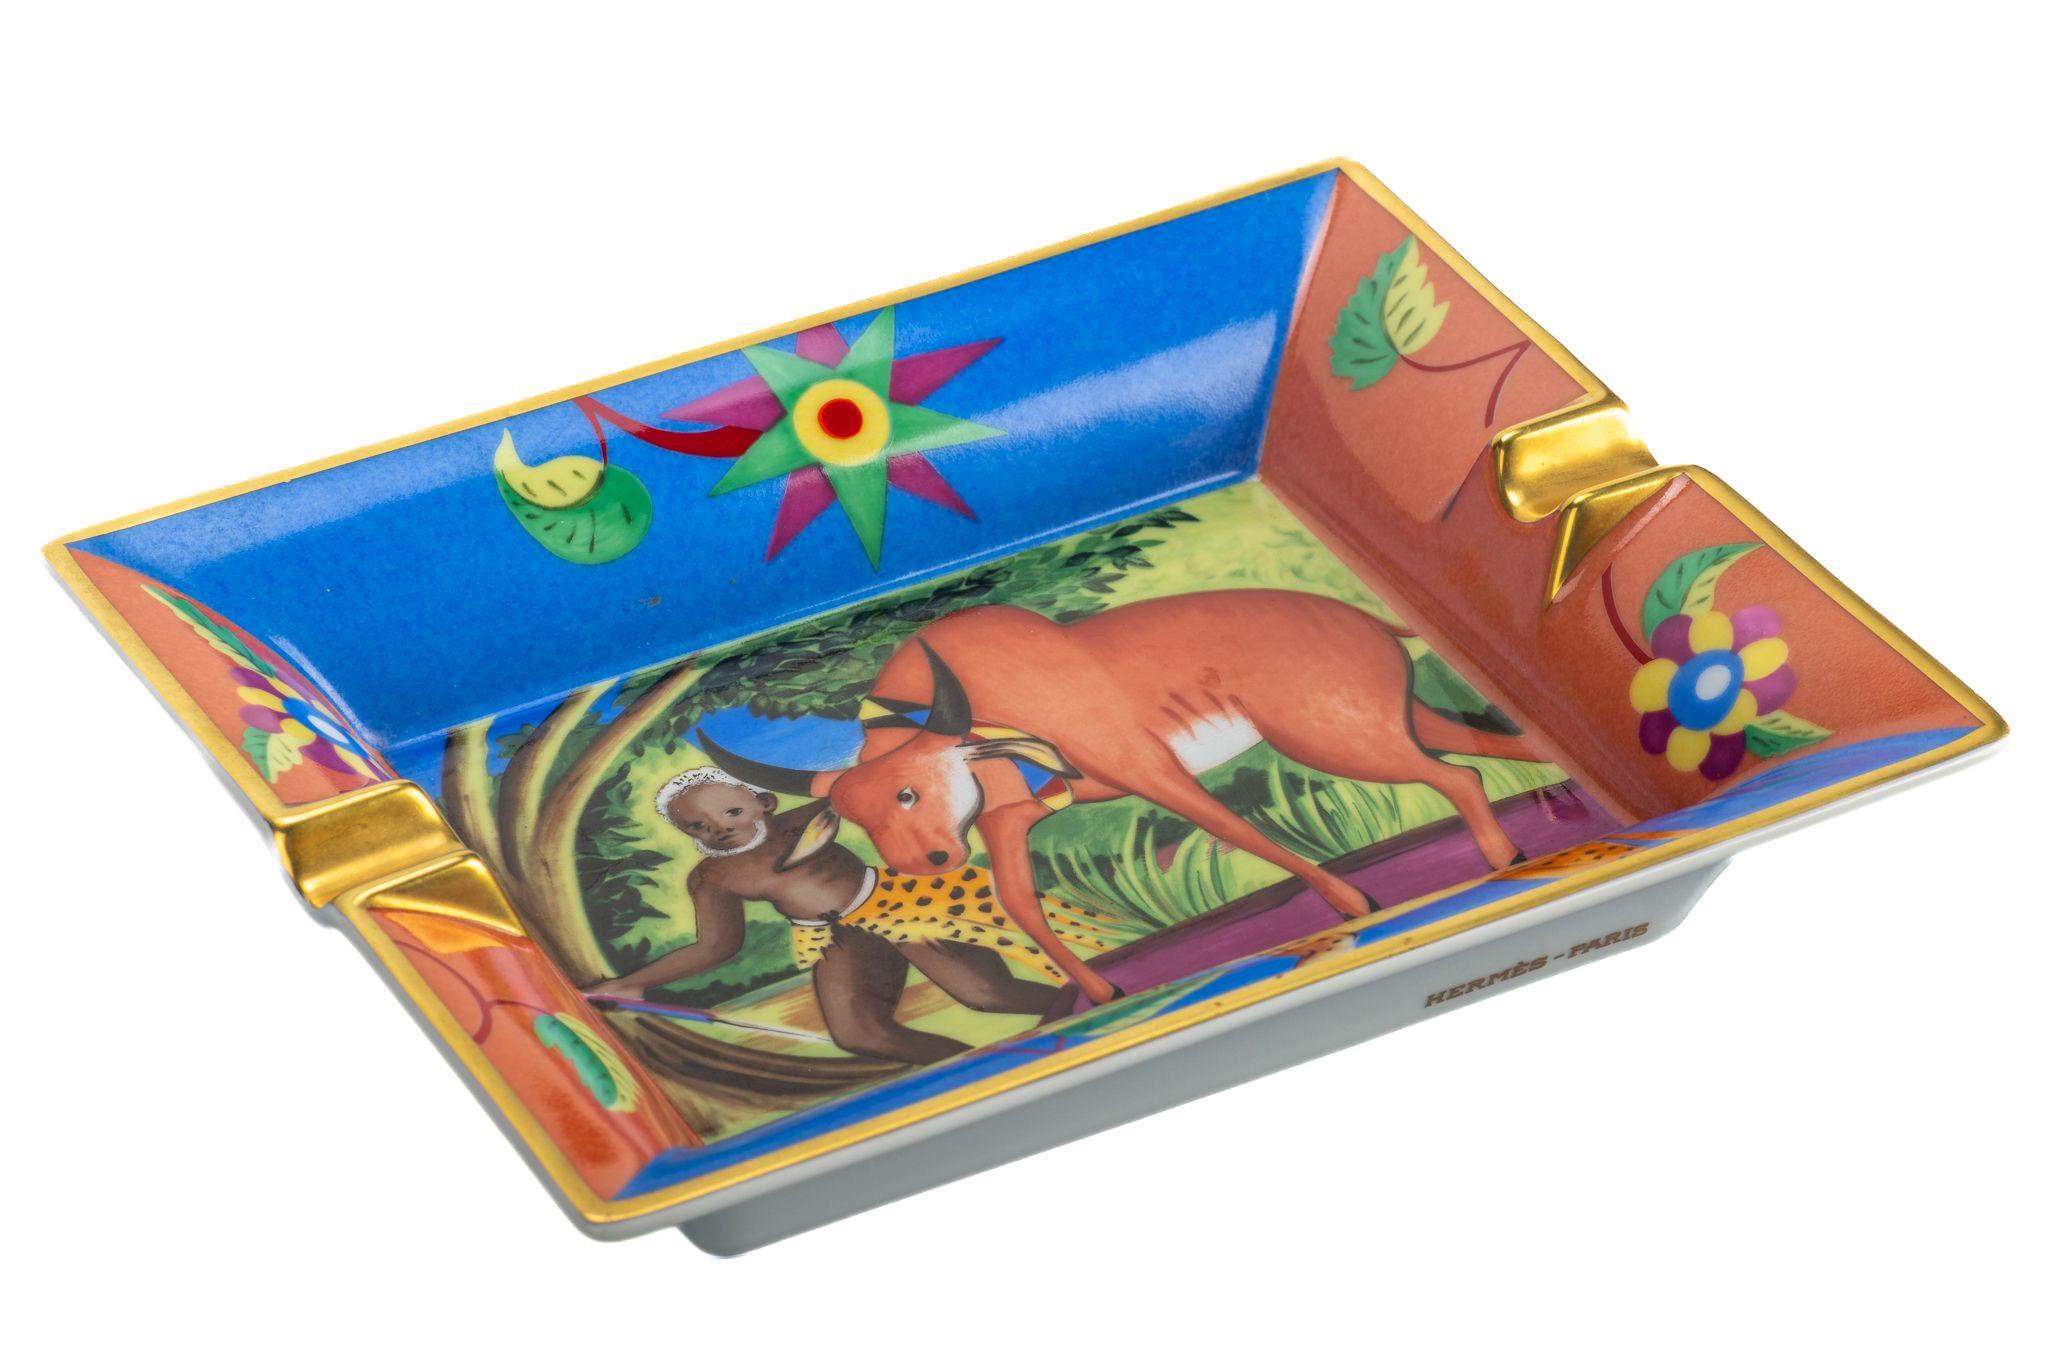 Hermes blue, green and brown porcelain ashtray with a jungle scene design
